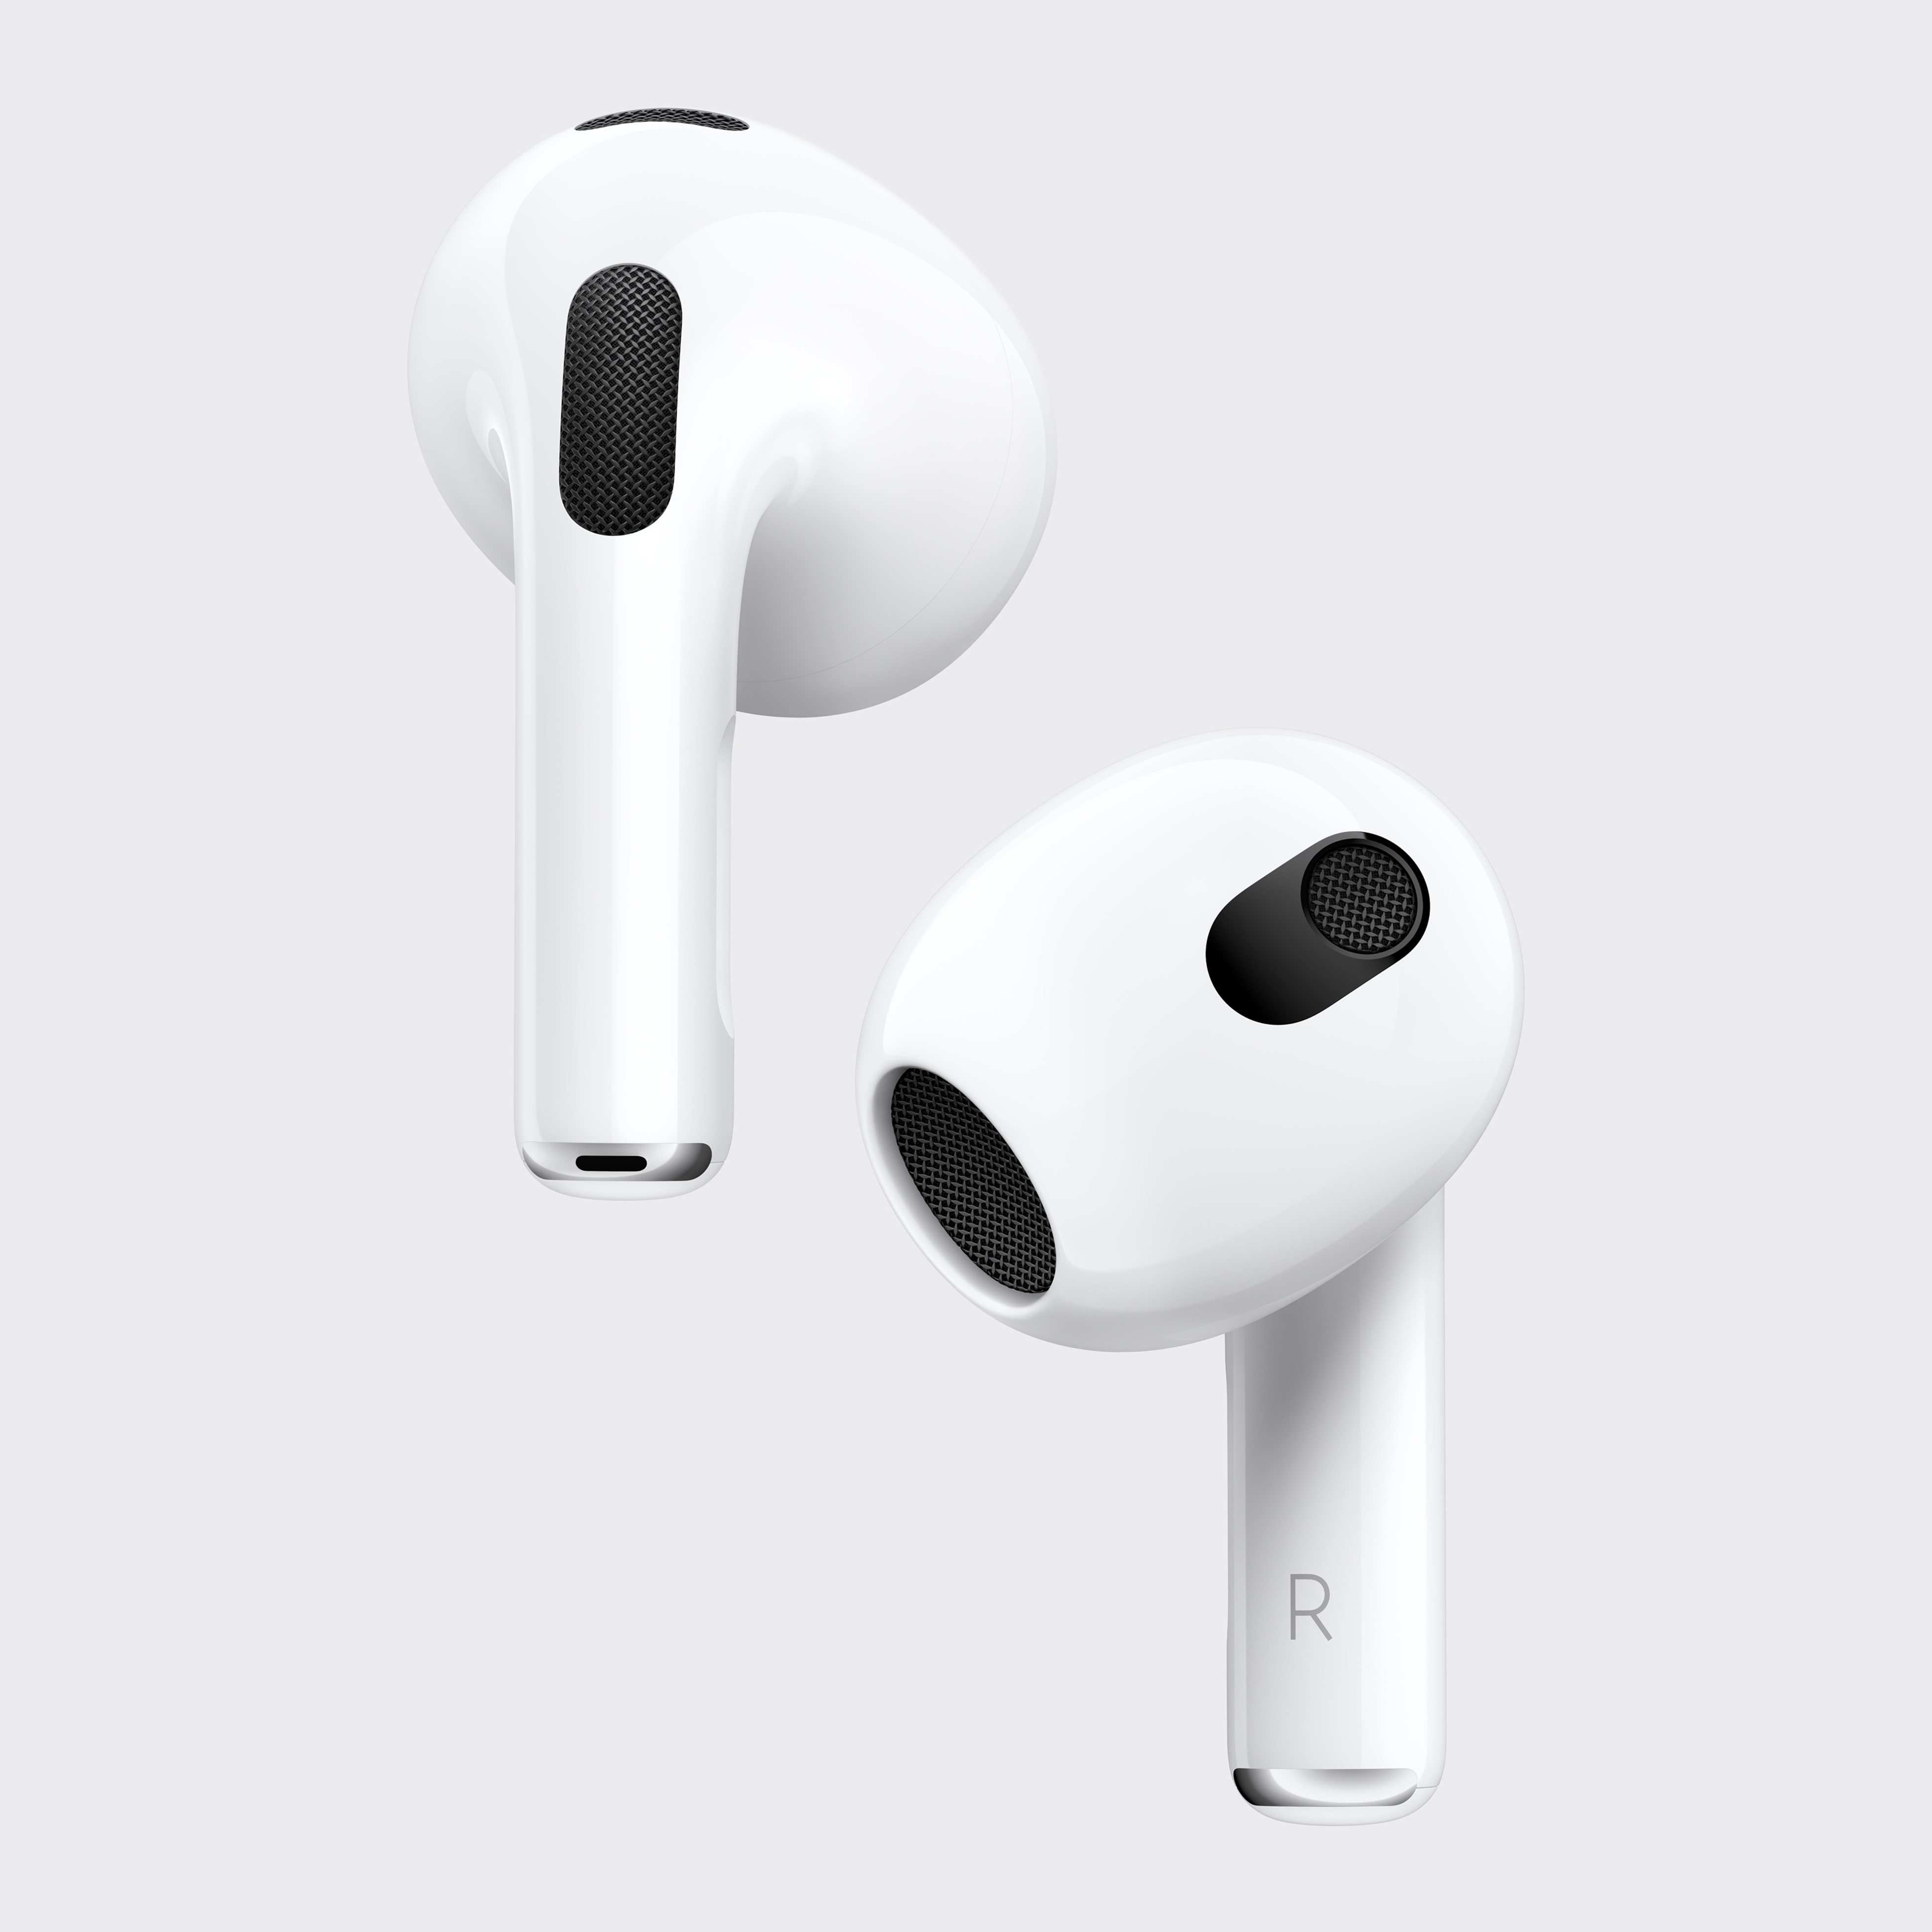 Introducing the next generation of AirPods